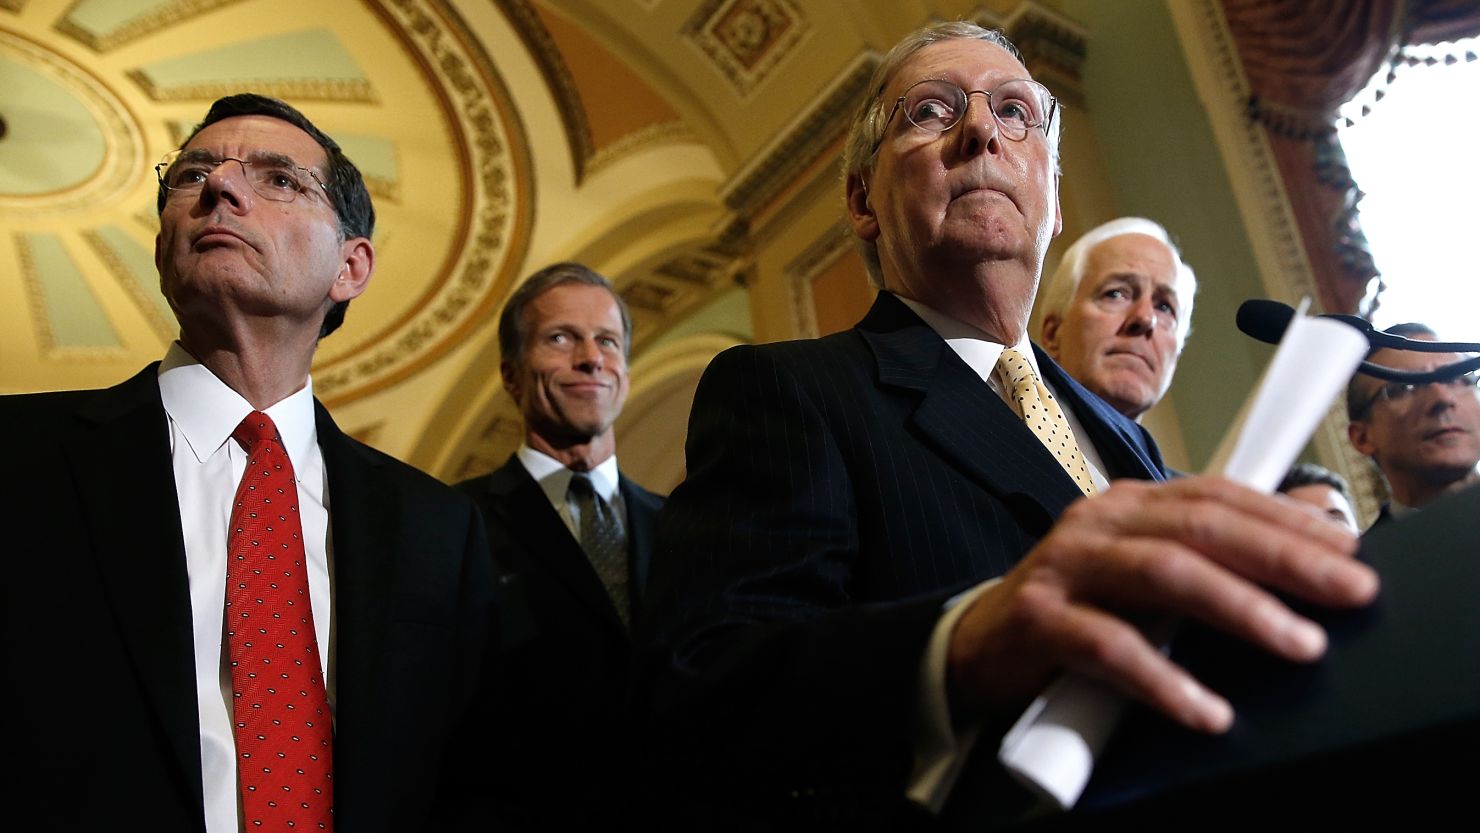 Senate Majority Leader Mitch McConnell answers questions with Republican leaders following the weekly Republican policy luncheon at the US Capitol on September 16, 2014 in Washington.